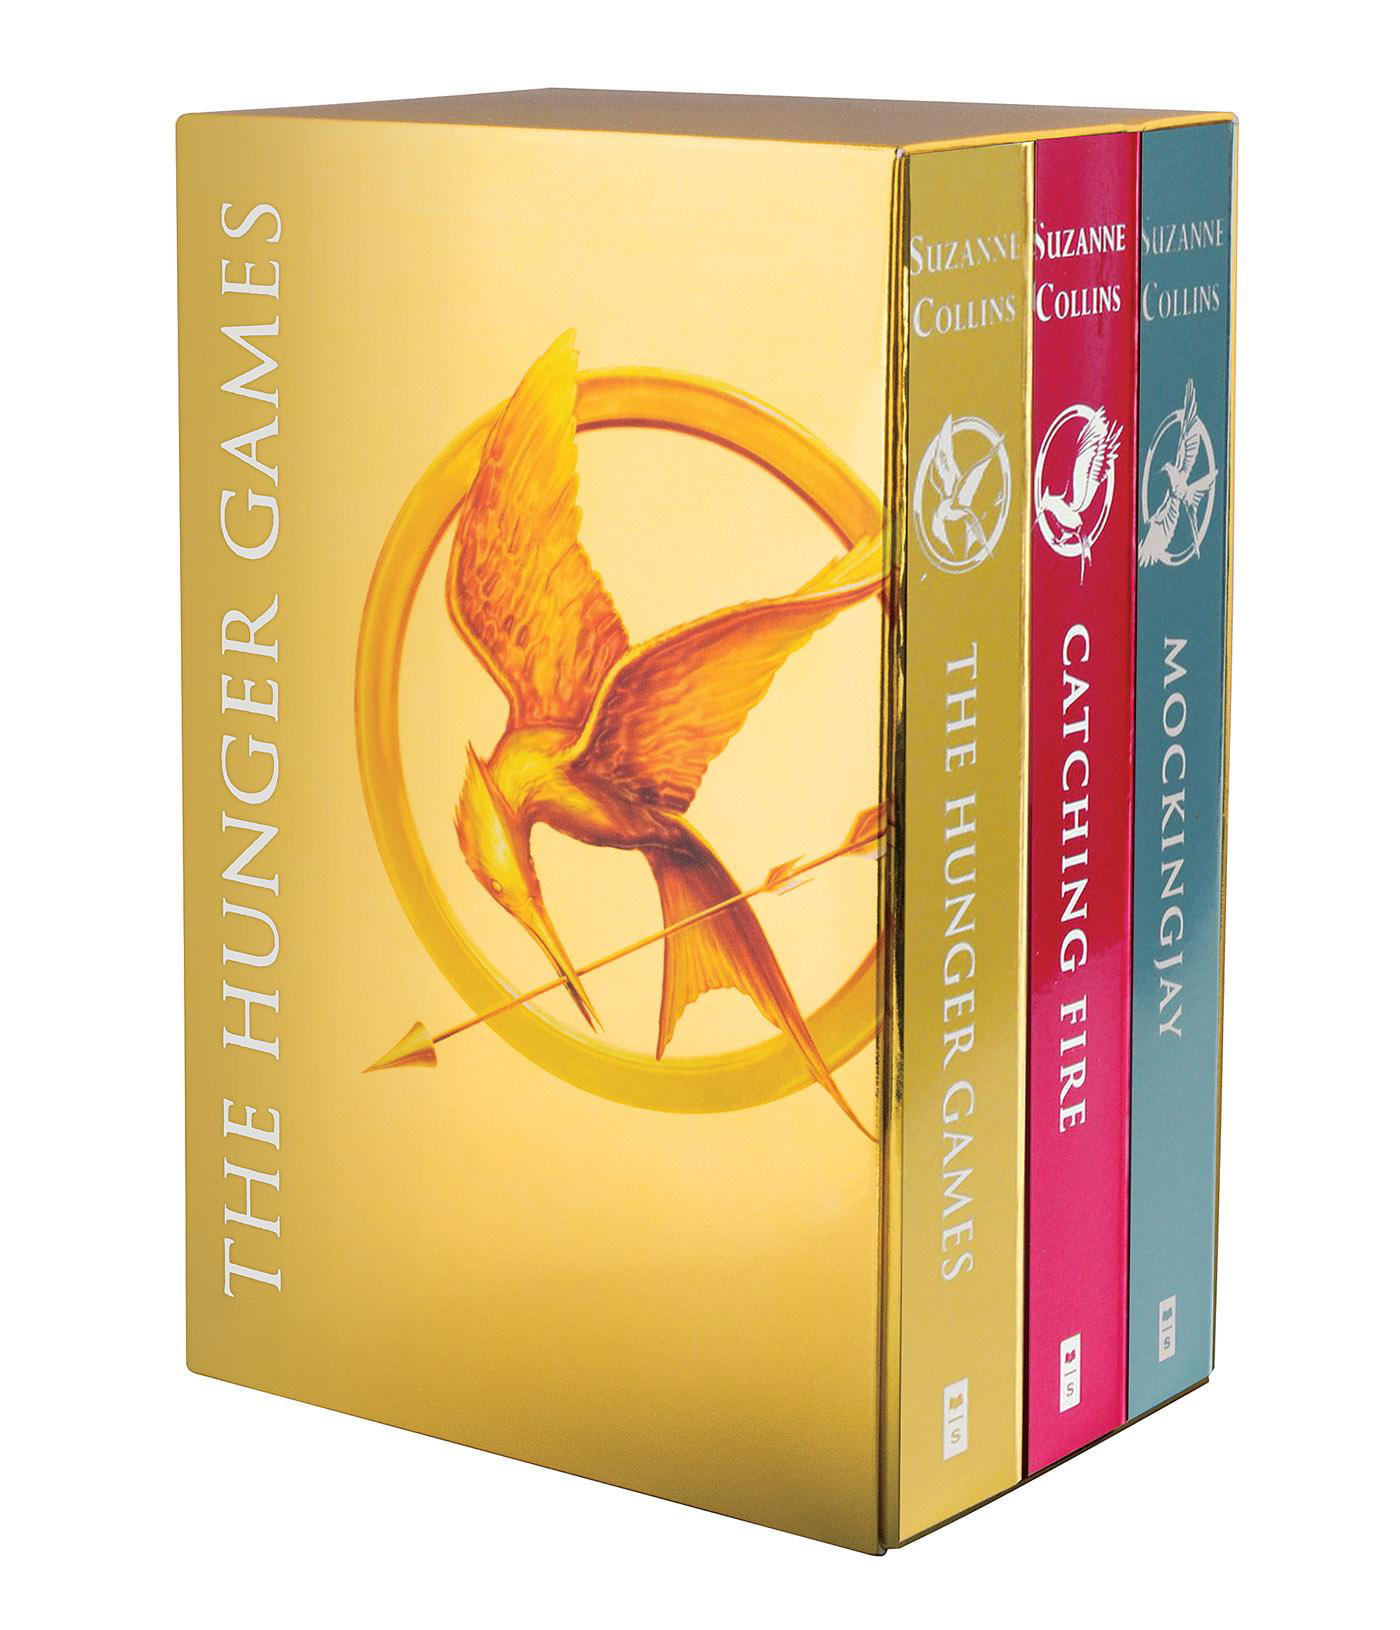 Hunger Games 4-Book Hardcover Box Set (the Hunger Games, Catching